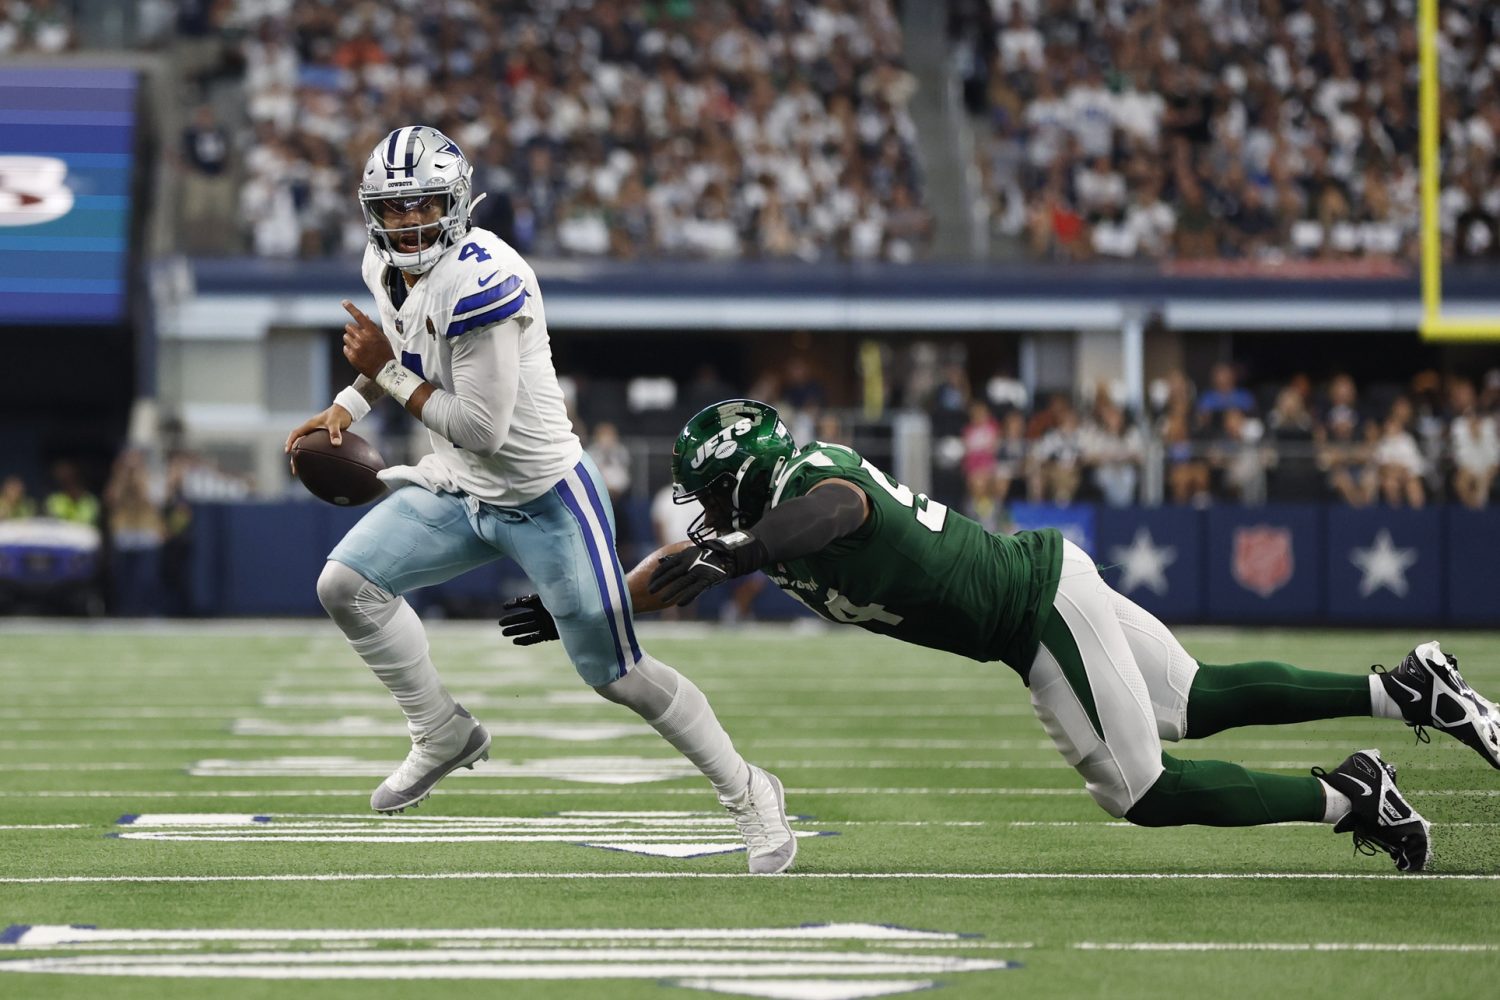 Dallas Cowboys quarterback Dak Prescott is tripped up by New York Jets defensive end Solomon Thomas in the second quarter at AT&T Stadium.